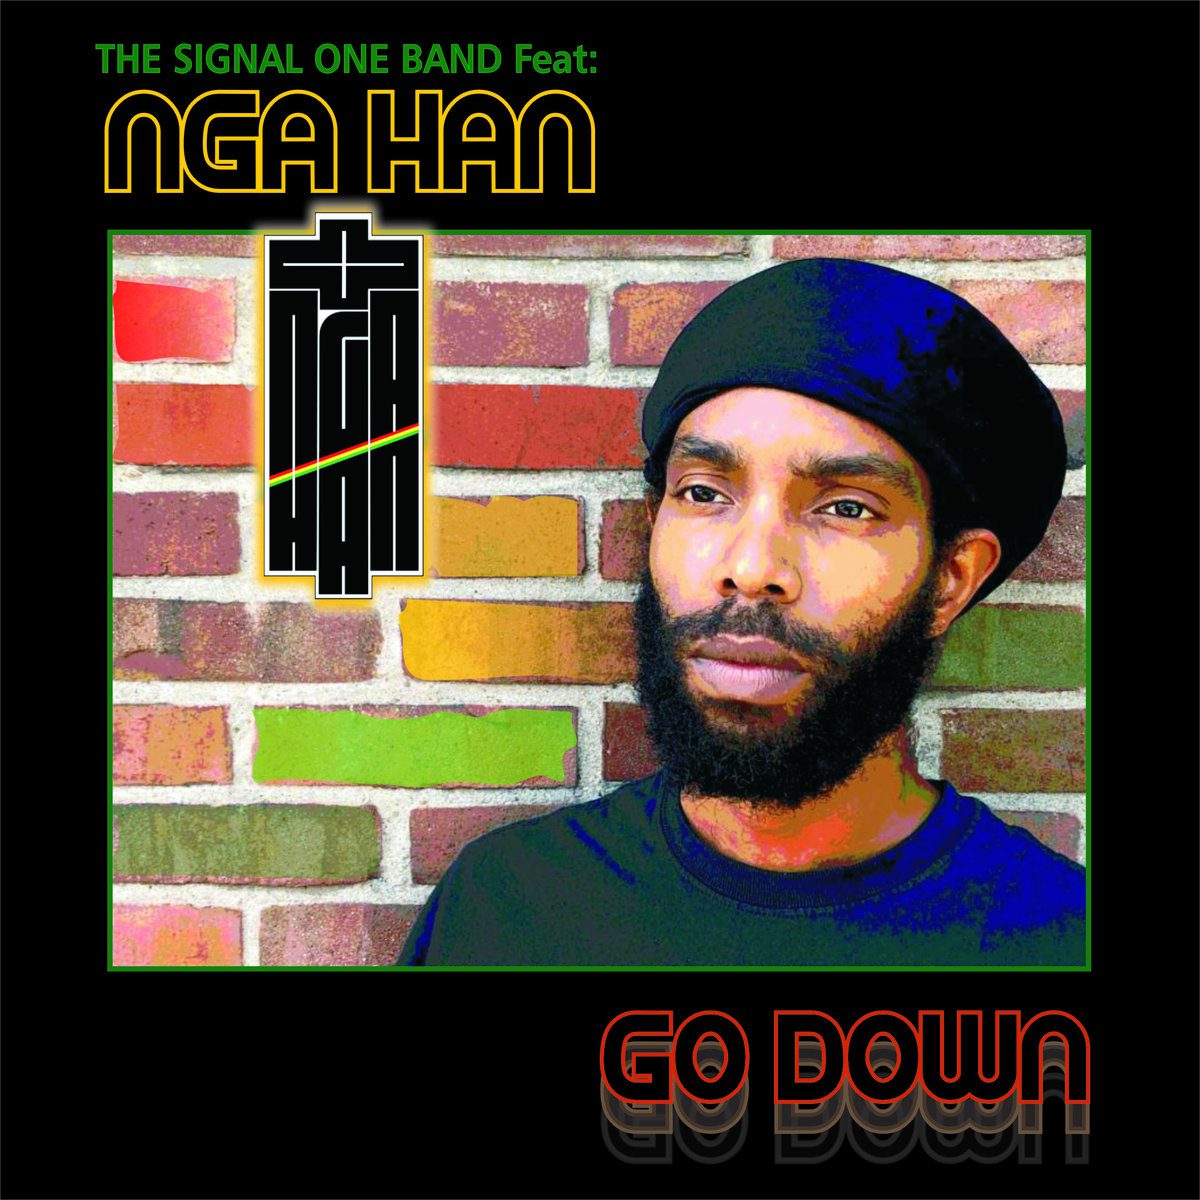 Nga Han & The Signal One Band released a single “Go Down” (Earth Works Amsterdam)